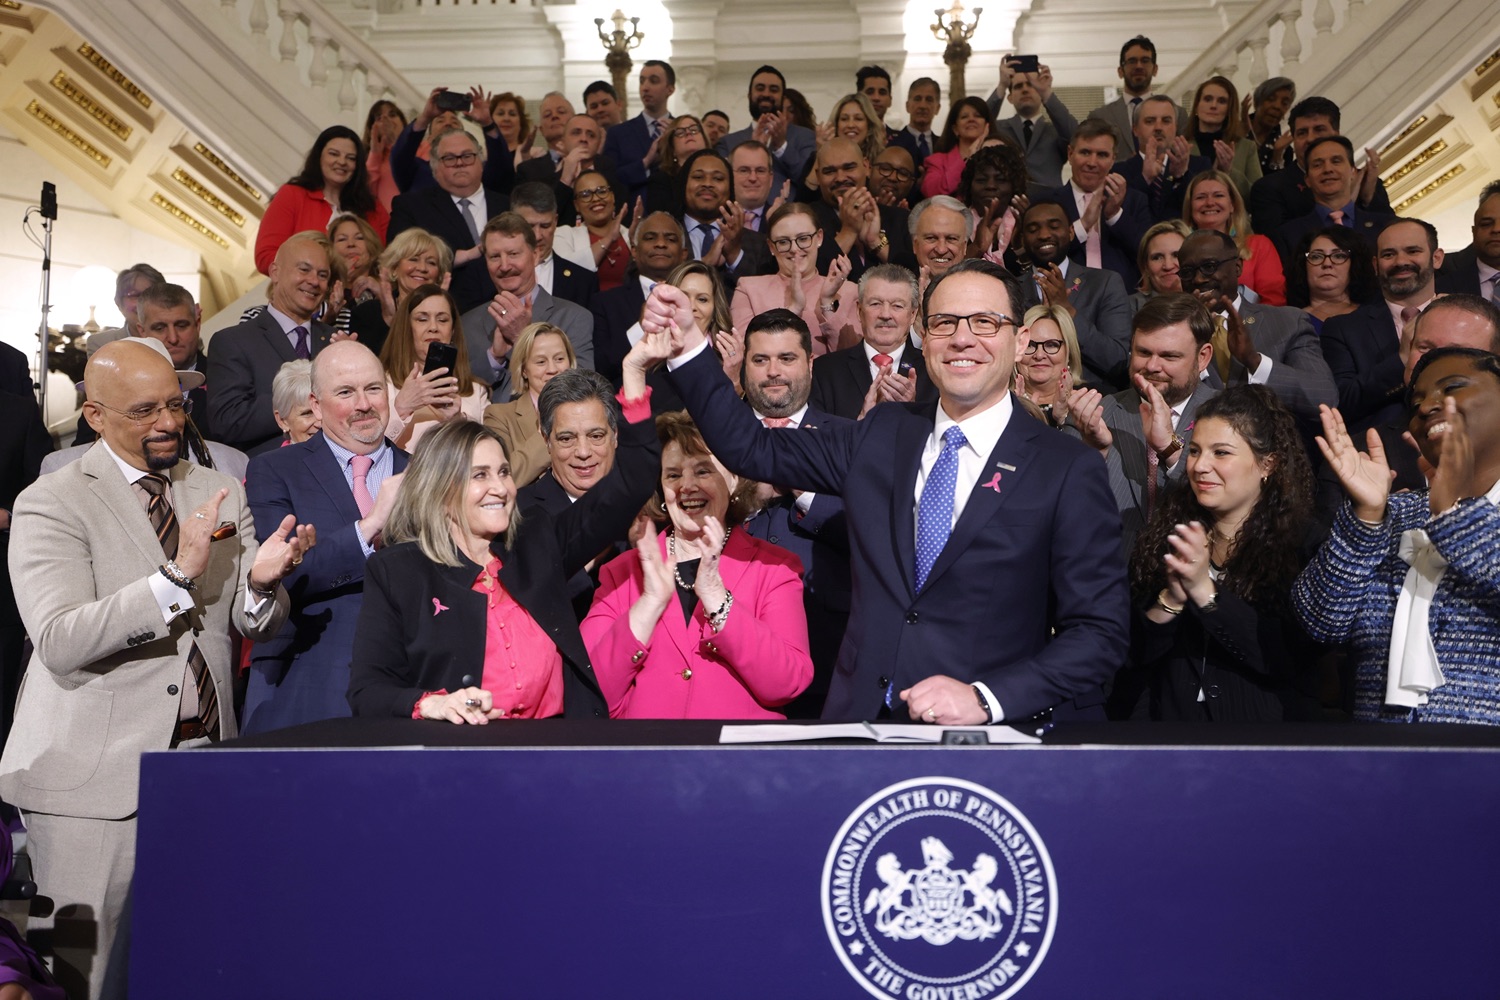 Governor Josh Shapiro signed the first bill of his Administration - Act 1 of 2023, a first-of-its-kind law in the nation that will require insurers to cover preventive breast and ovarian cancer screenings for high-risk women at no cost. MAY 01, 2023 - HARRISBURG, PA<br><a href="https://filesource.amperwave.net/commonwealthofpa/photo/23041_gov_sb8_dz_014.JPG" target="_blank">⇣ Download Photo</a>